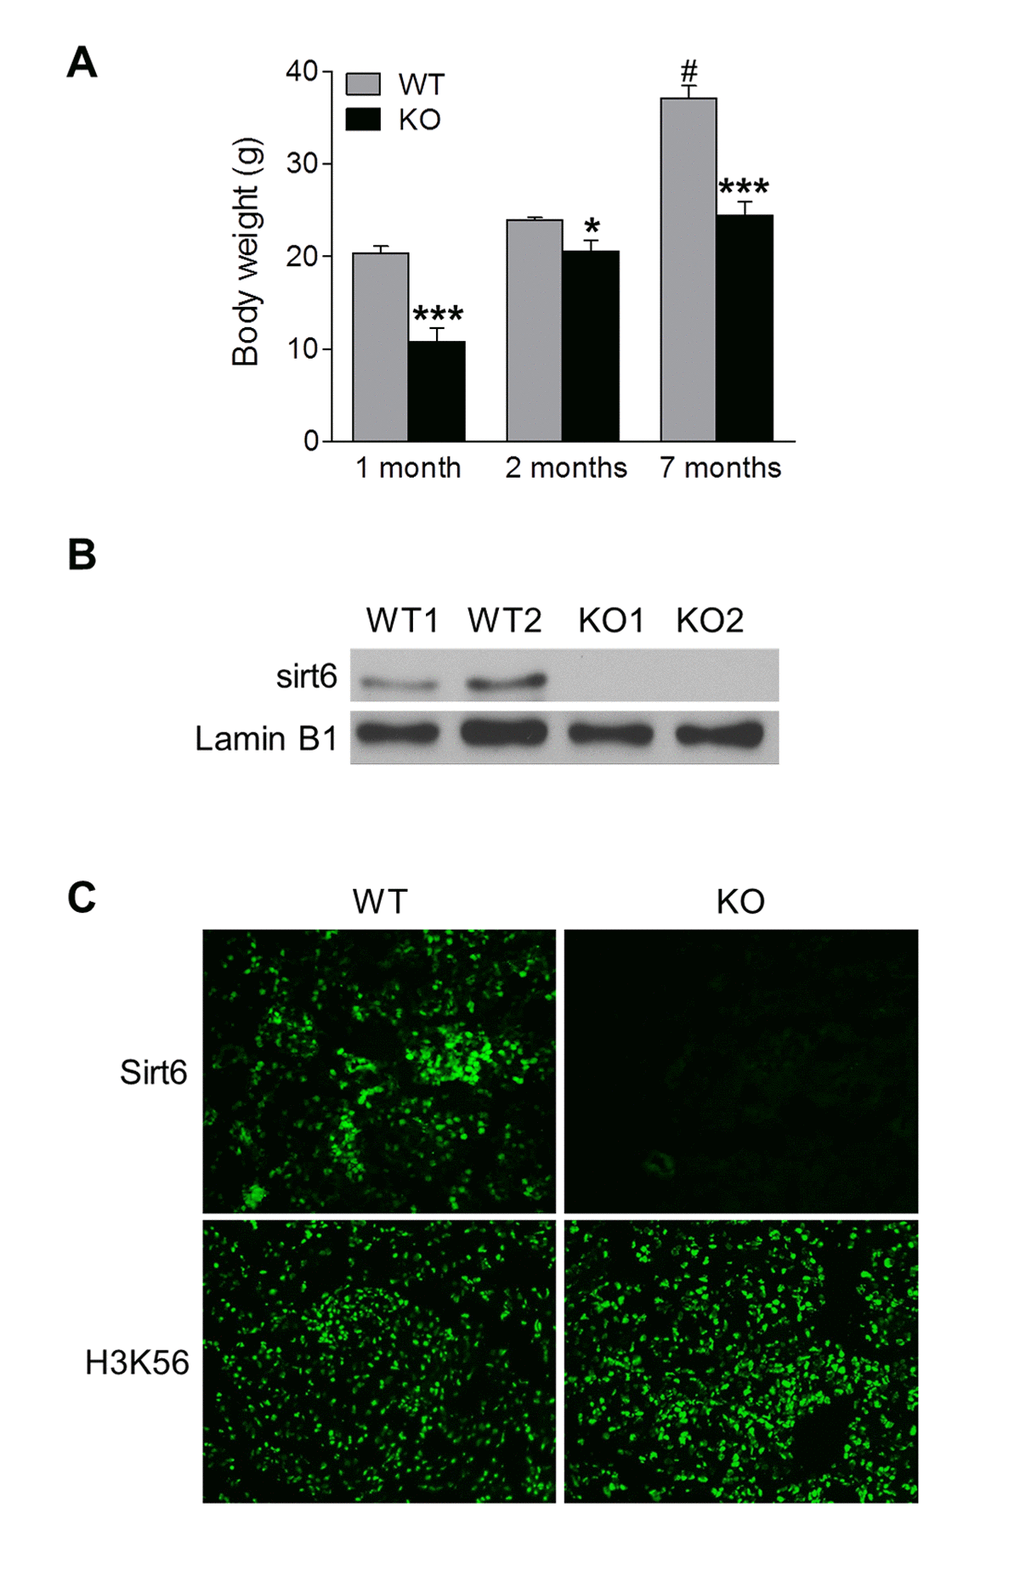 Functional Sirt6 is expressed in mouse kidney. (A) Body weight of Sirt6 KO mice and their WT littermates was quantified at various ages. Data are presented as mean ± SEM; n=8-9; *P#PB) Nuclear protein was extracted from the kidneys of WT and Sirt6 KO mice and Sirt6 protein expression was assessed by Western blot analysis. Lamin B1 served as loading control. (C) Immunofluorescence of Sirt6 and H3K56 in kidney cryosections from WT and Sirt6 KO mice.